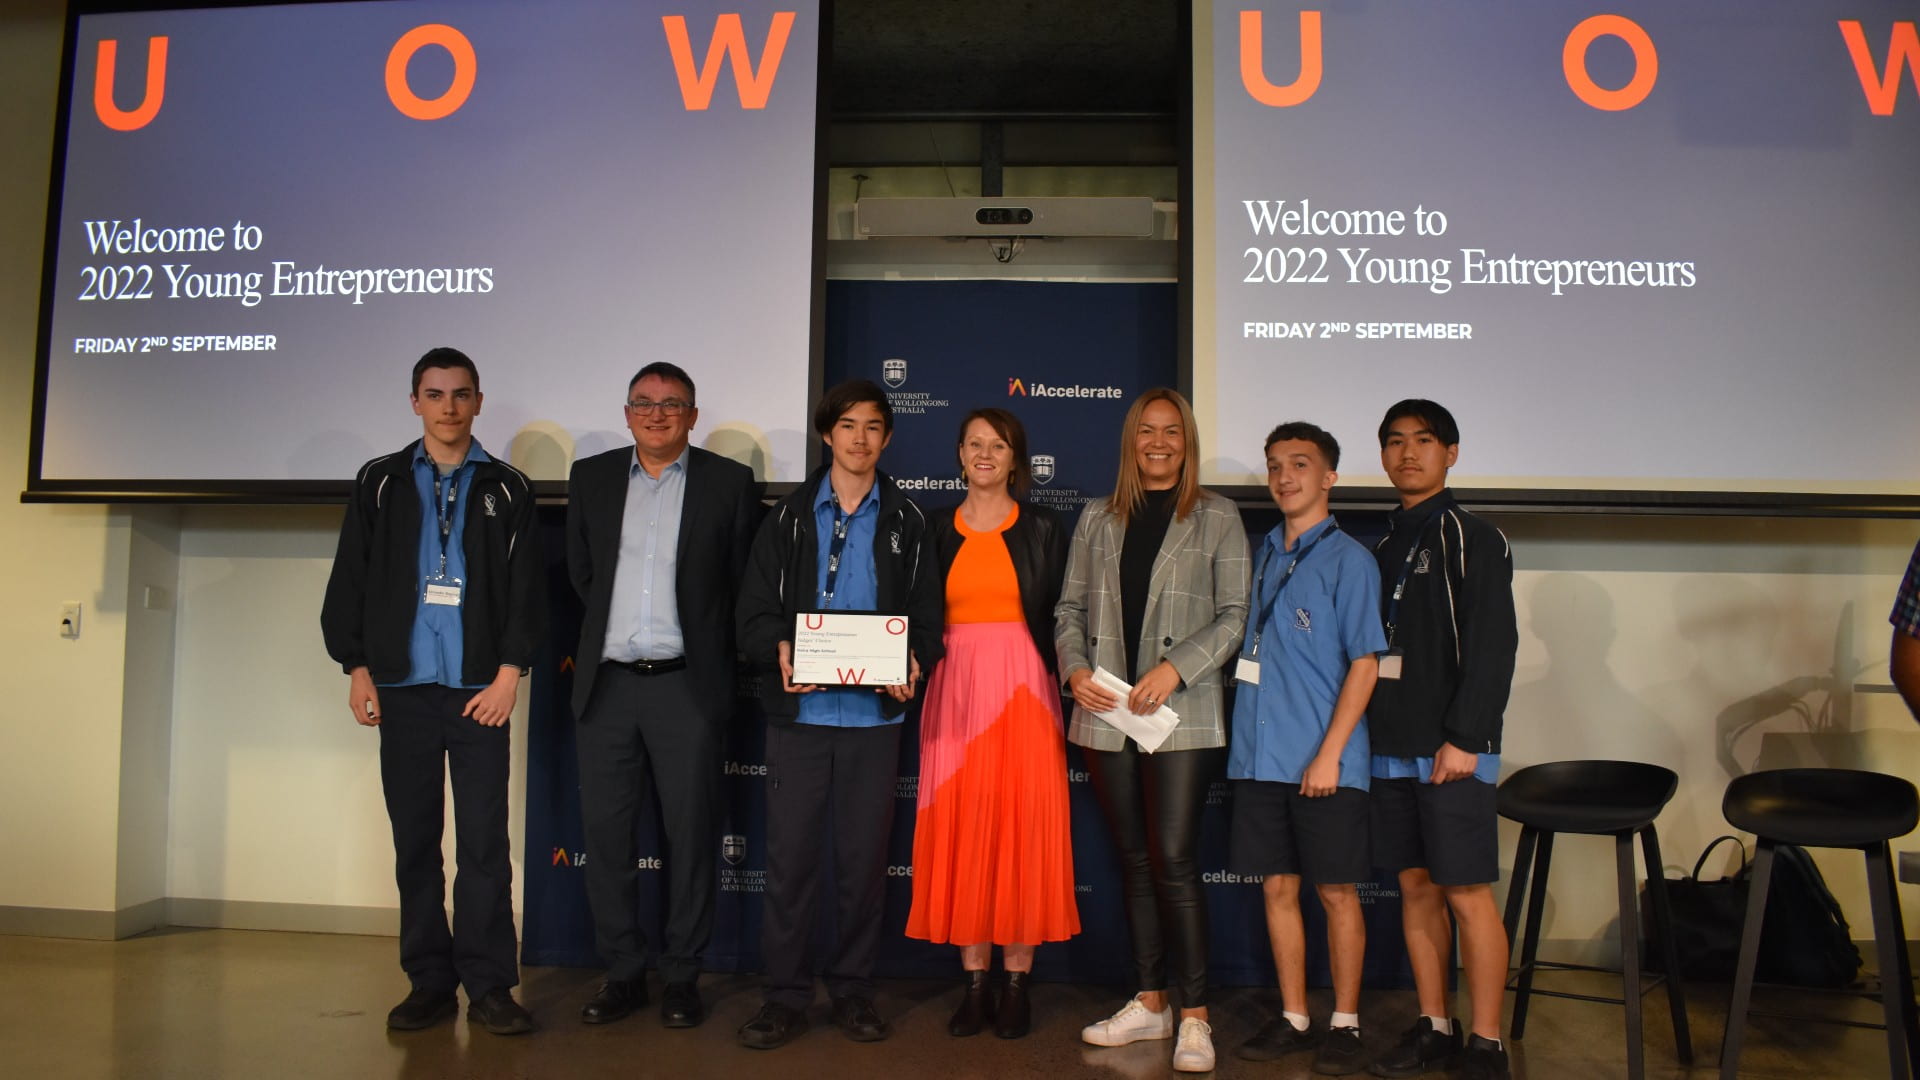 Students from Keira High School, wearing blue jumpers, stand in front of two UOW screens.